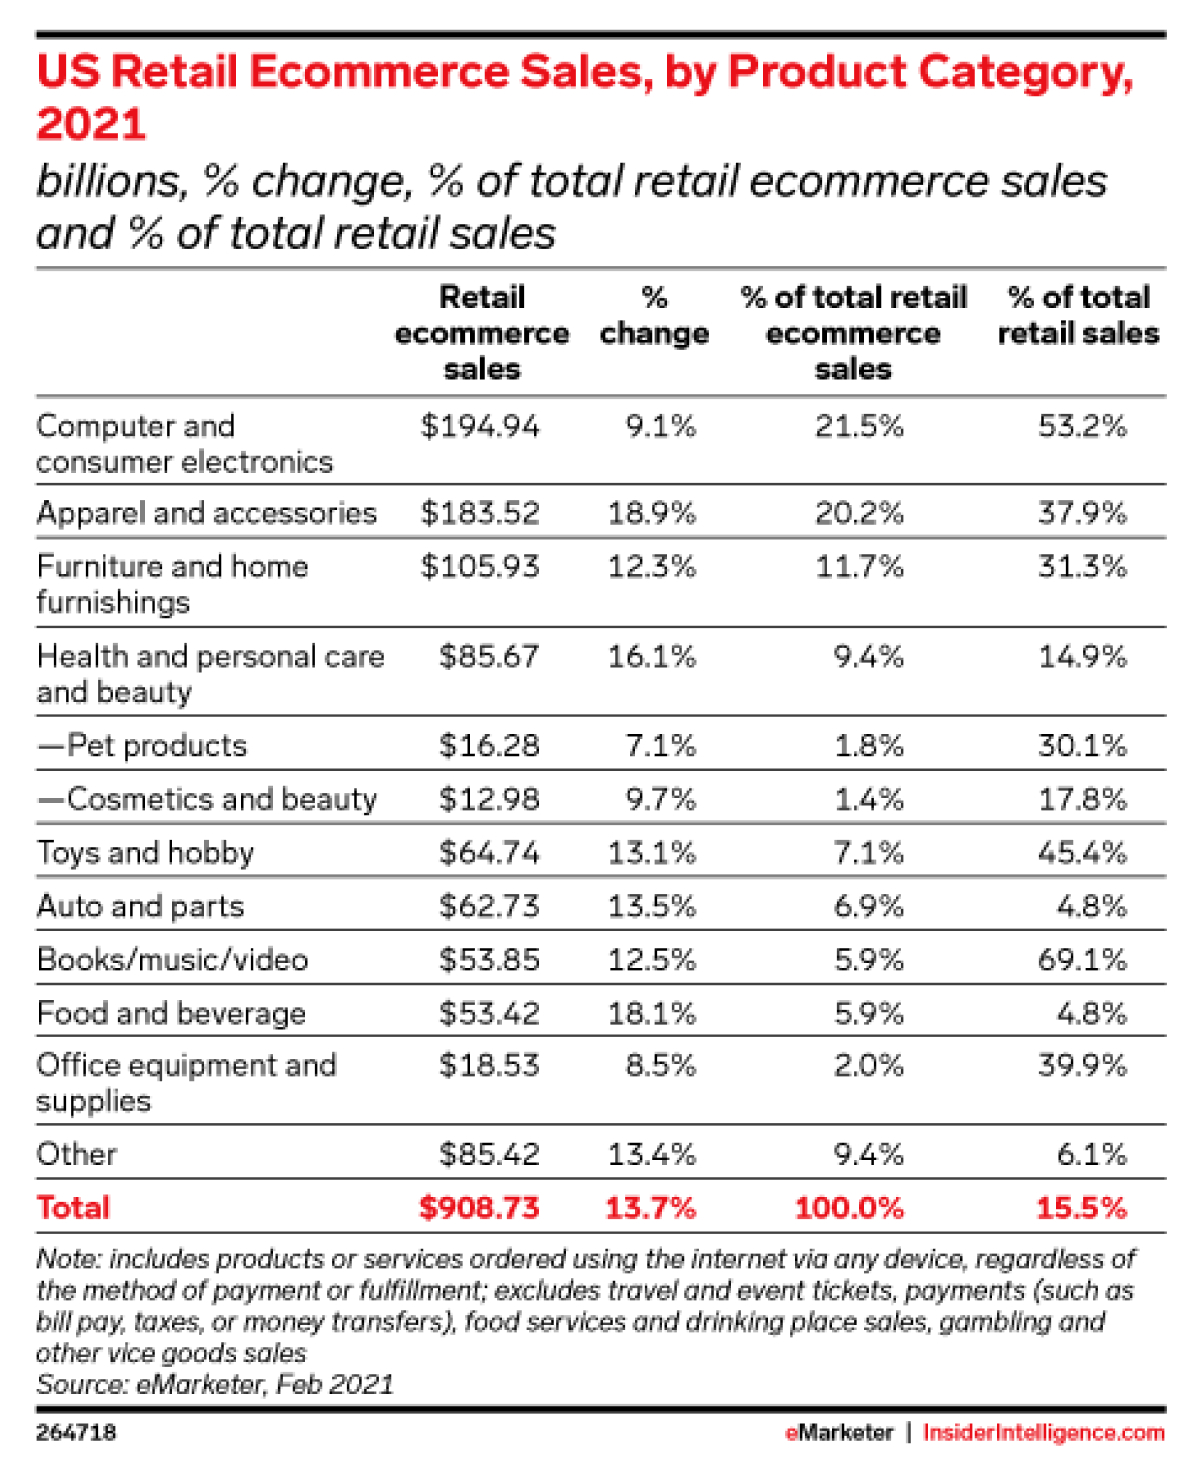 US retail ecommerce sales affinity pattern